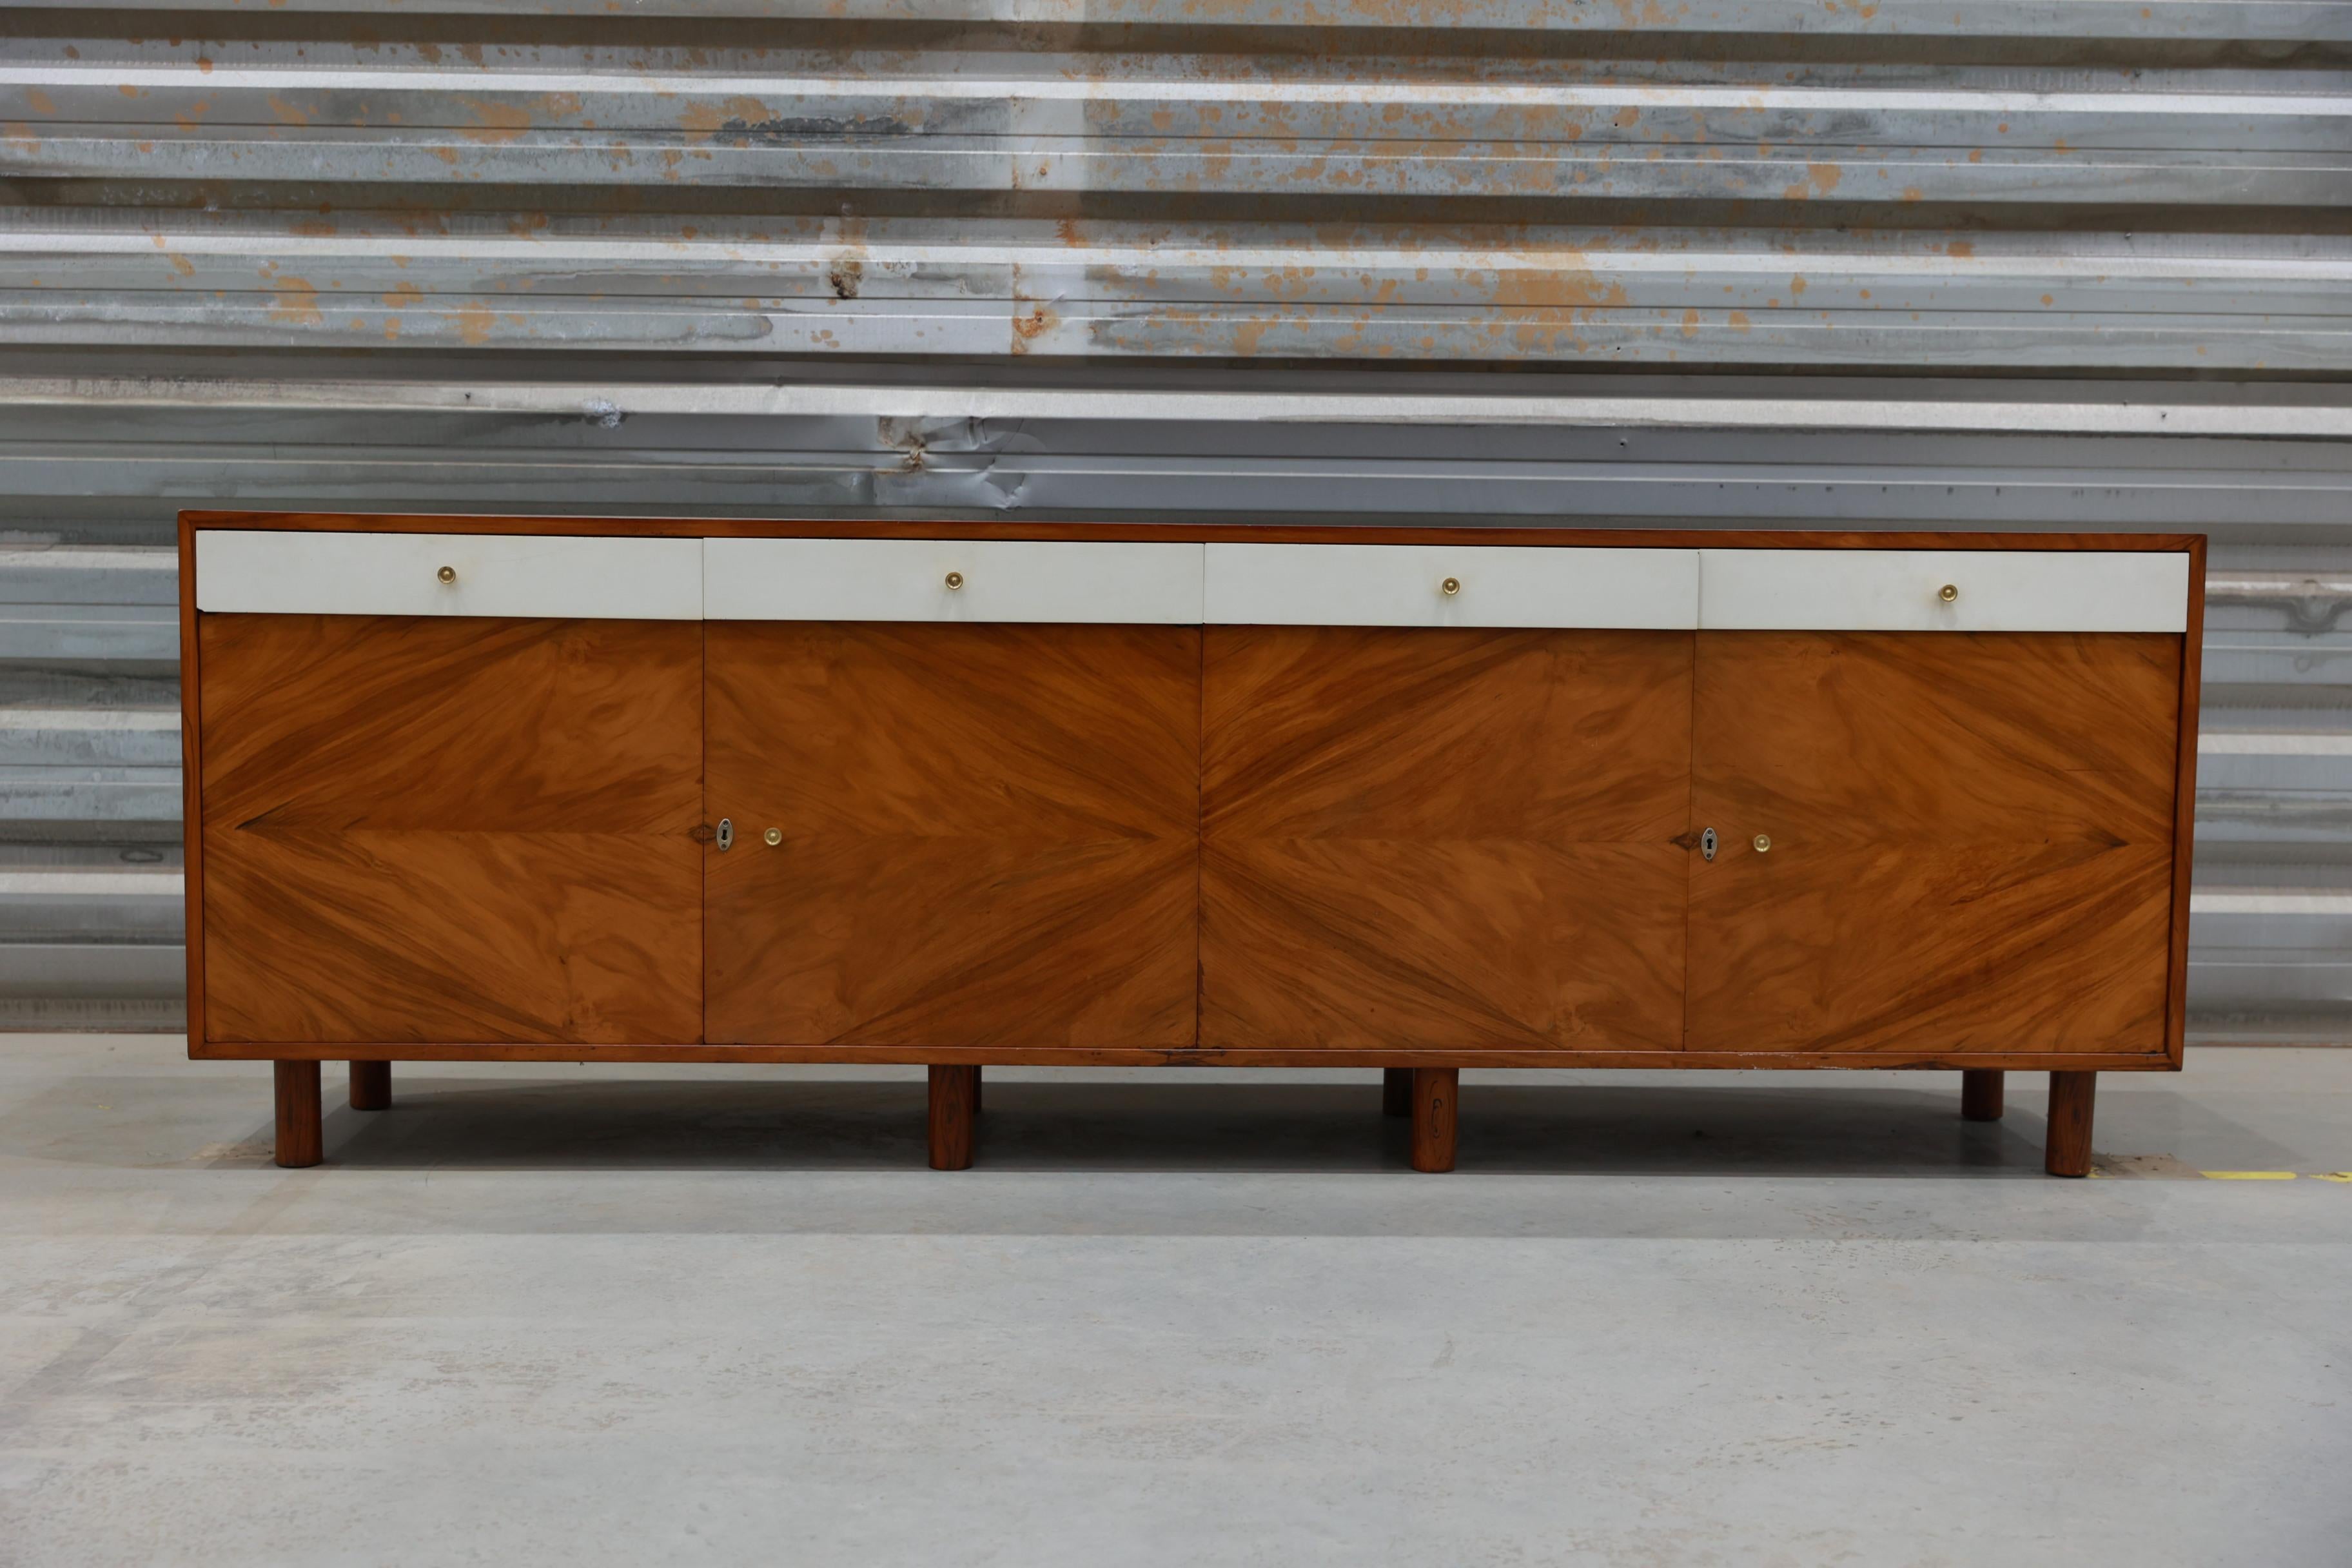 Available TODAY in NYC with free shipping included, this Credenza in Hardwood and Brass, Ernesto Hauner, c. 1960s is nothing less than a beauty!

This spectacular mid-century modern credenza is made with the finest Caviuna wood, and it is composed